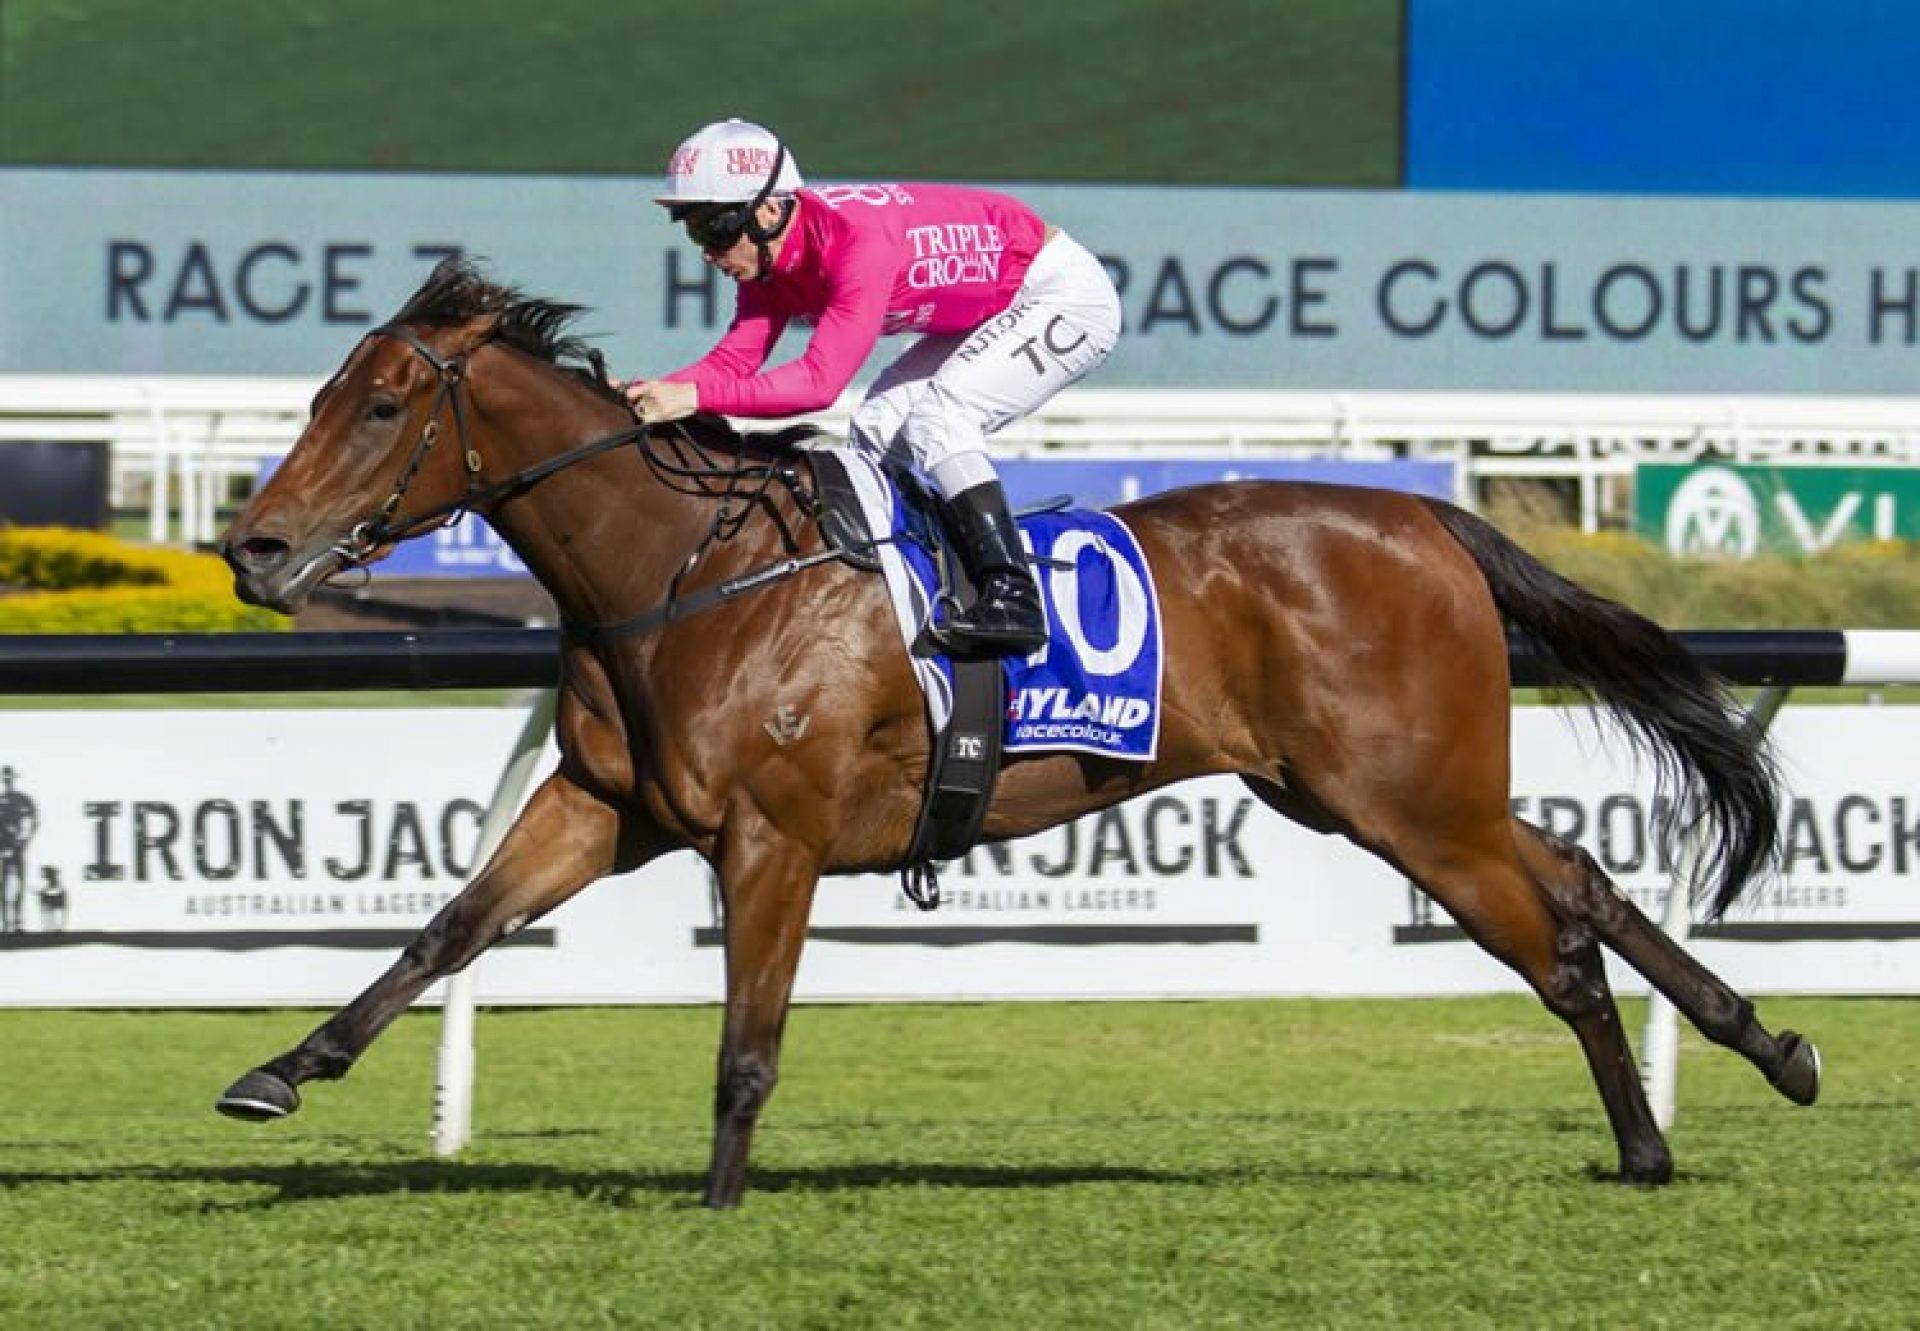 Reelem In Ruby (Pierro) winning the Gr.2 Hot Danish Stakes at Rosehill